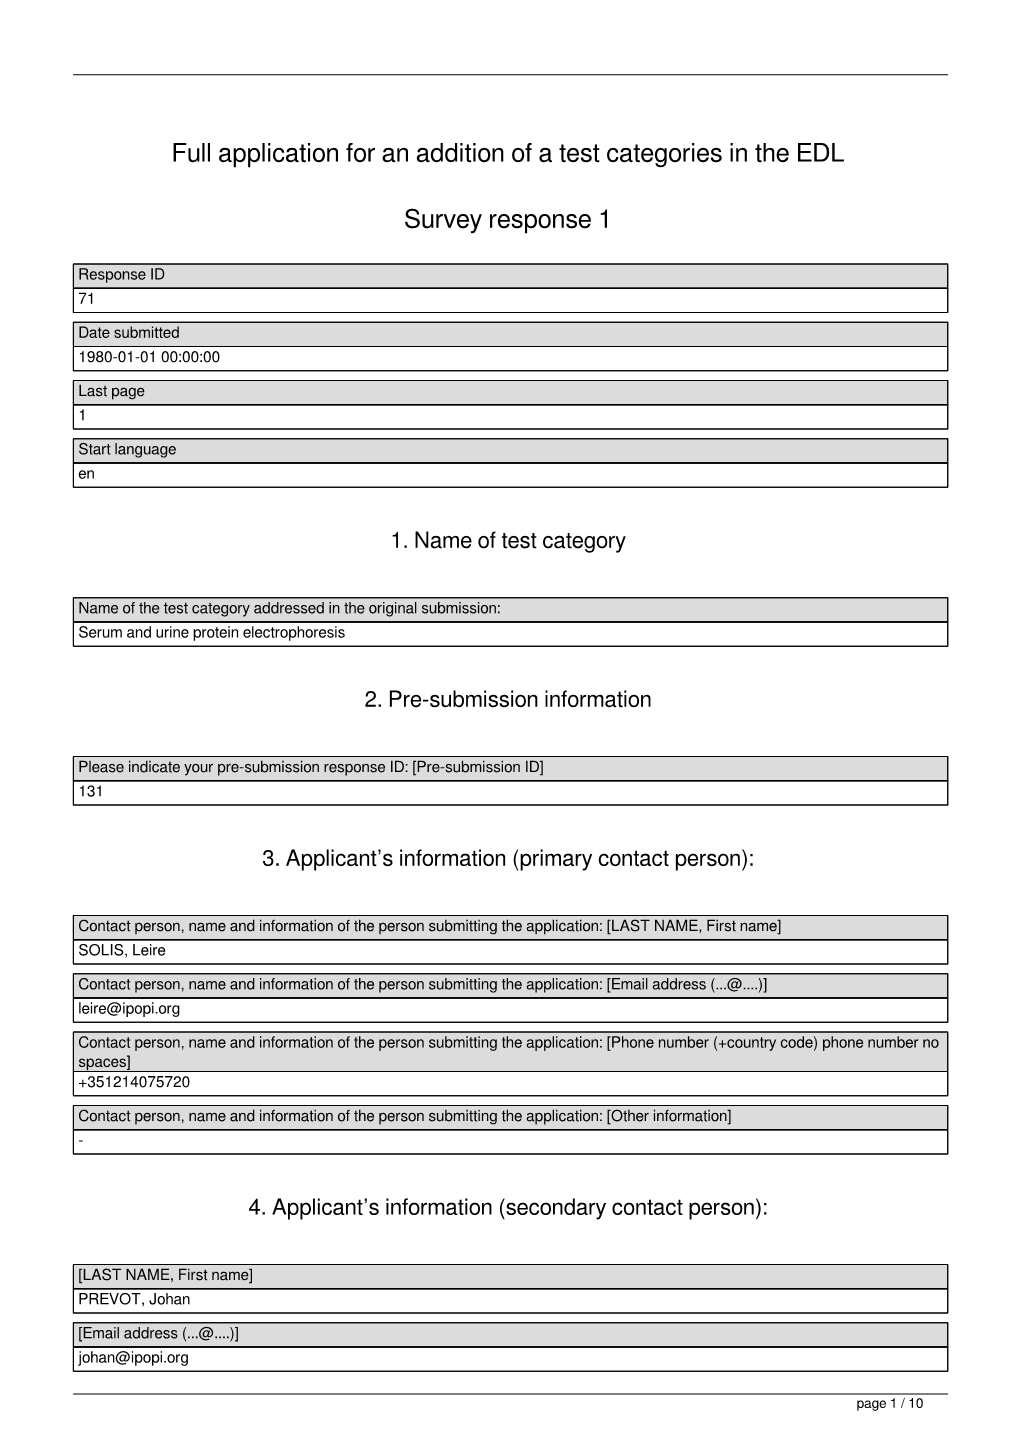 Full Application for an Addition of a Test Categories in the EDL